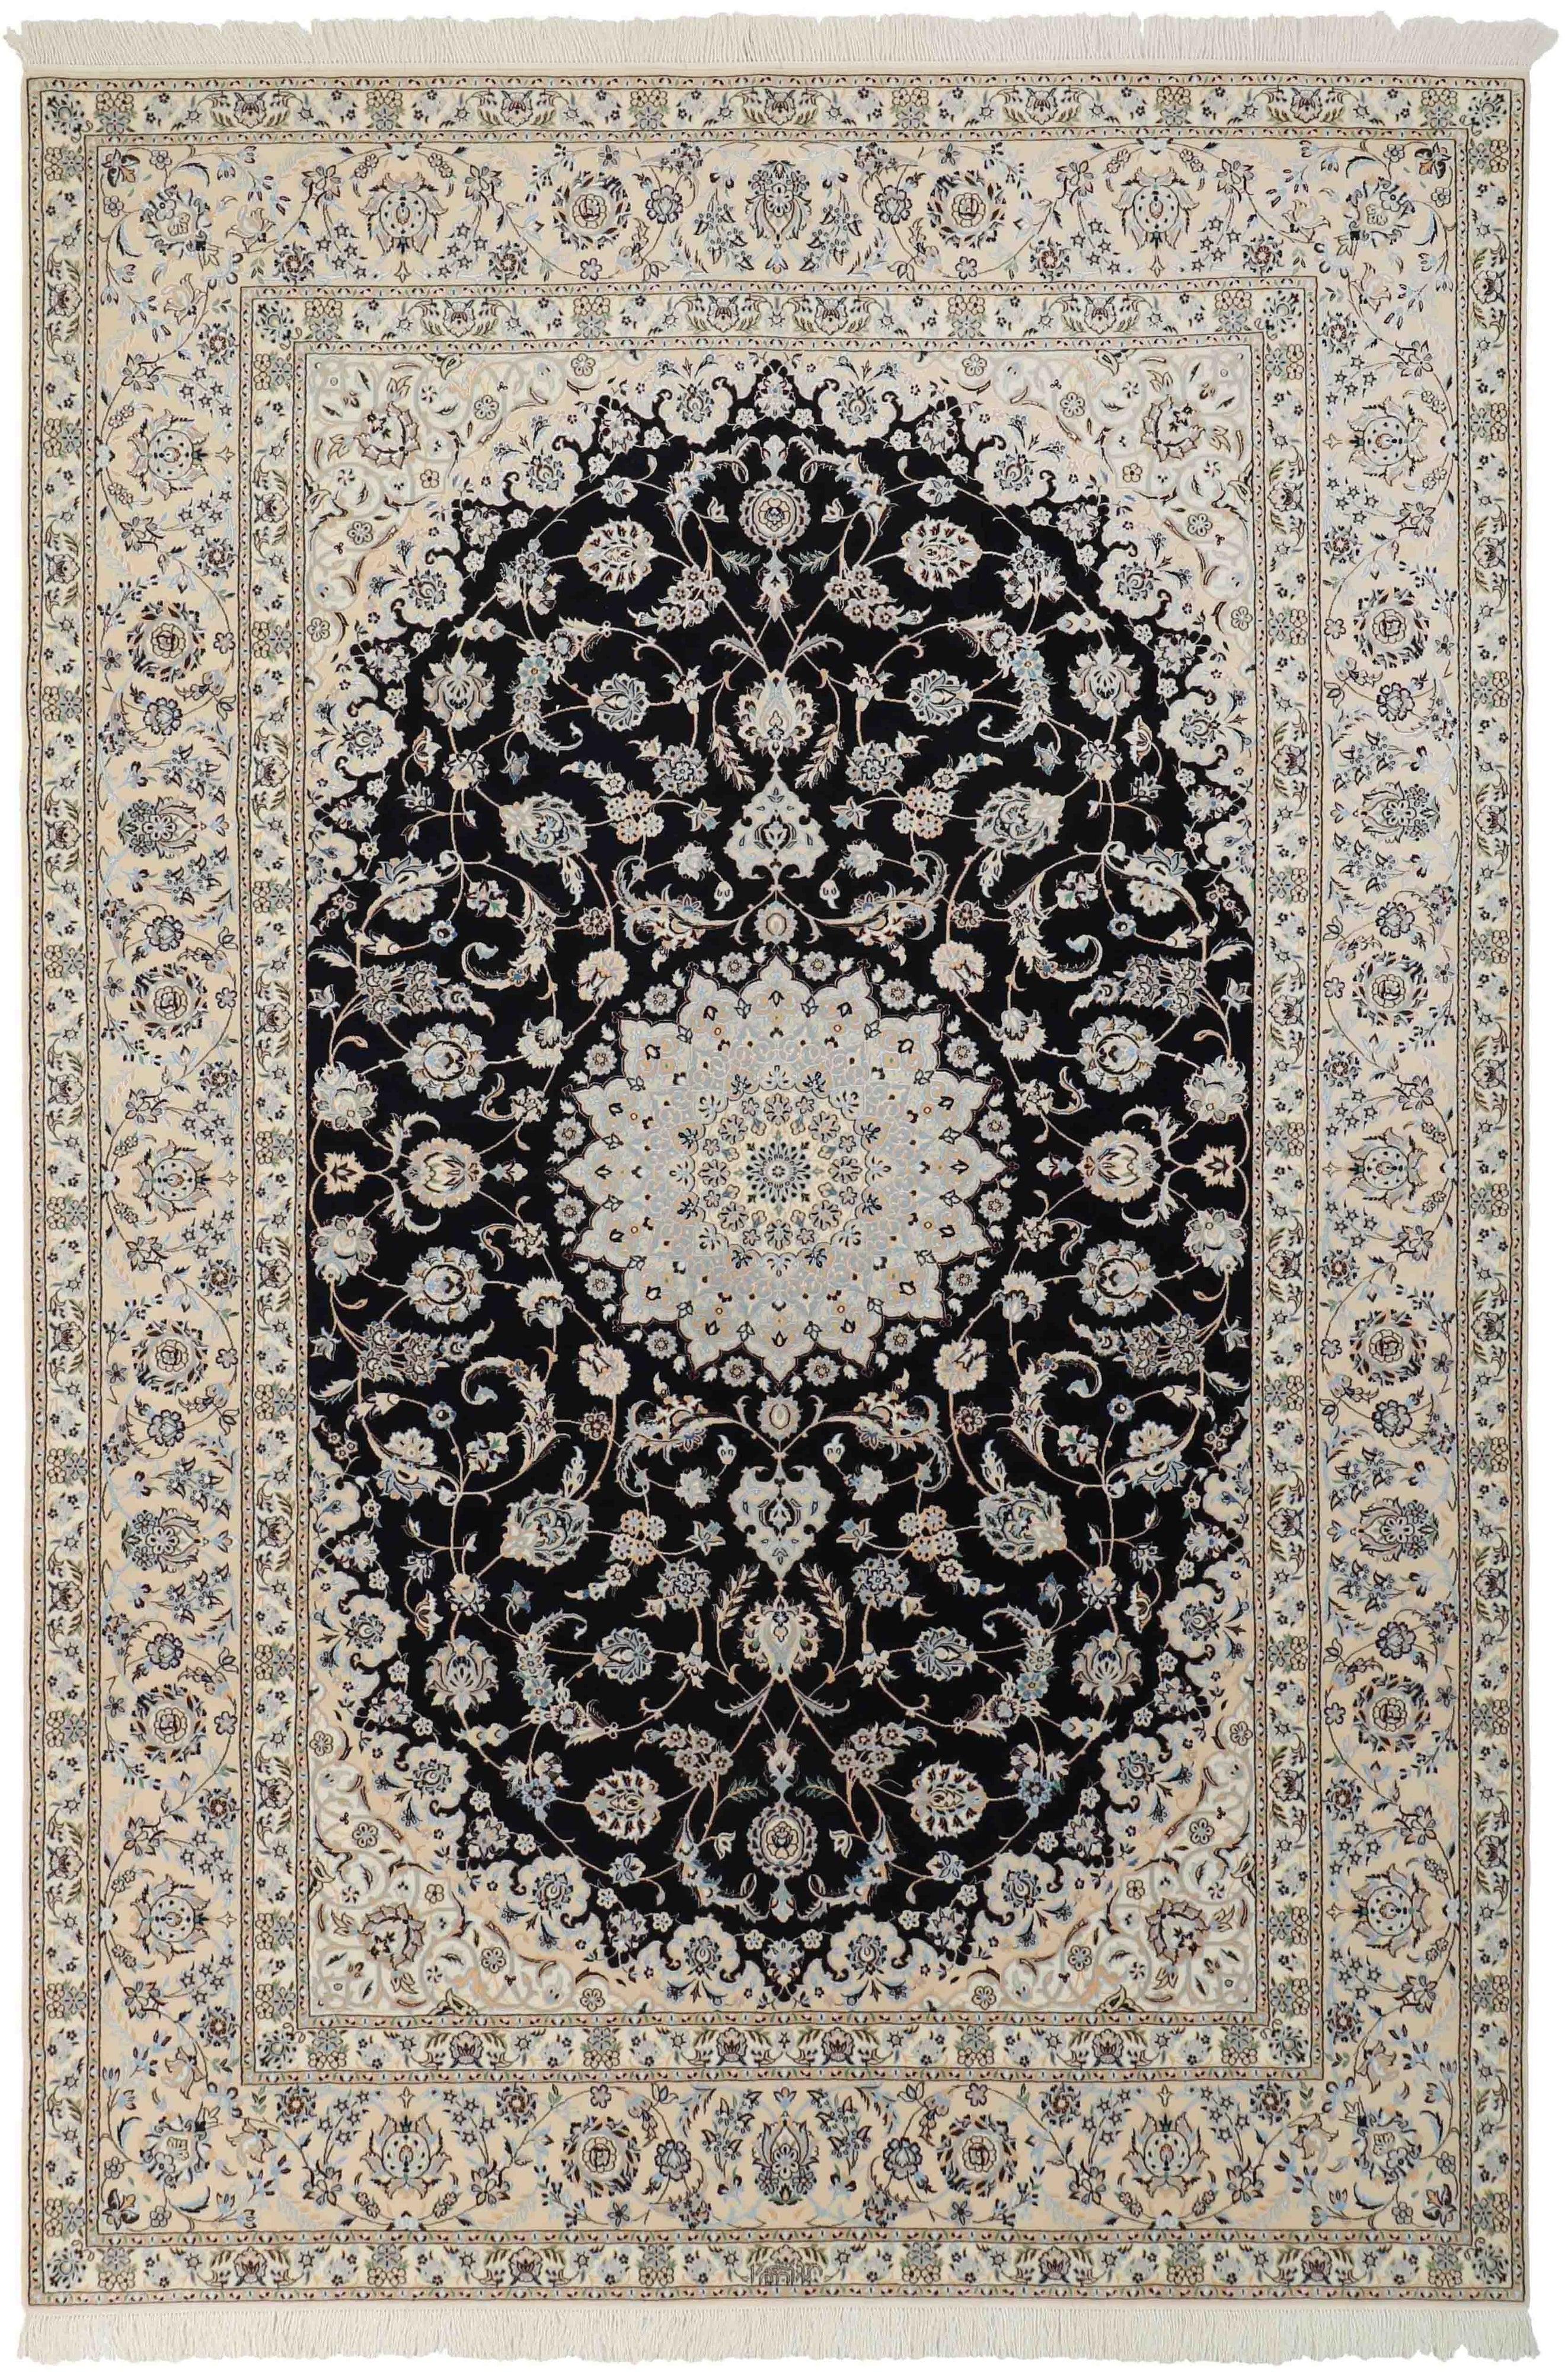 Authentic oriental rug with traditional floral design in cream, red, blue and black